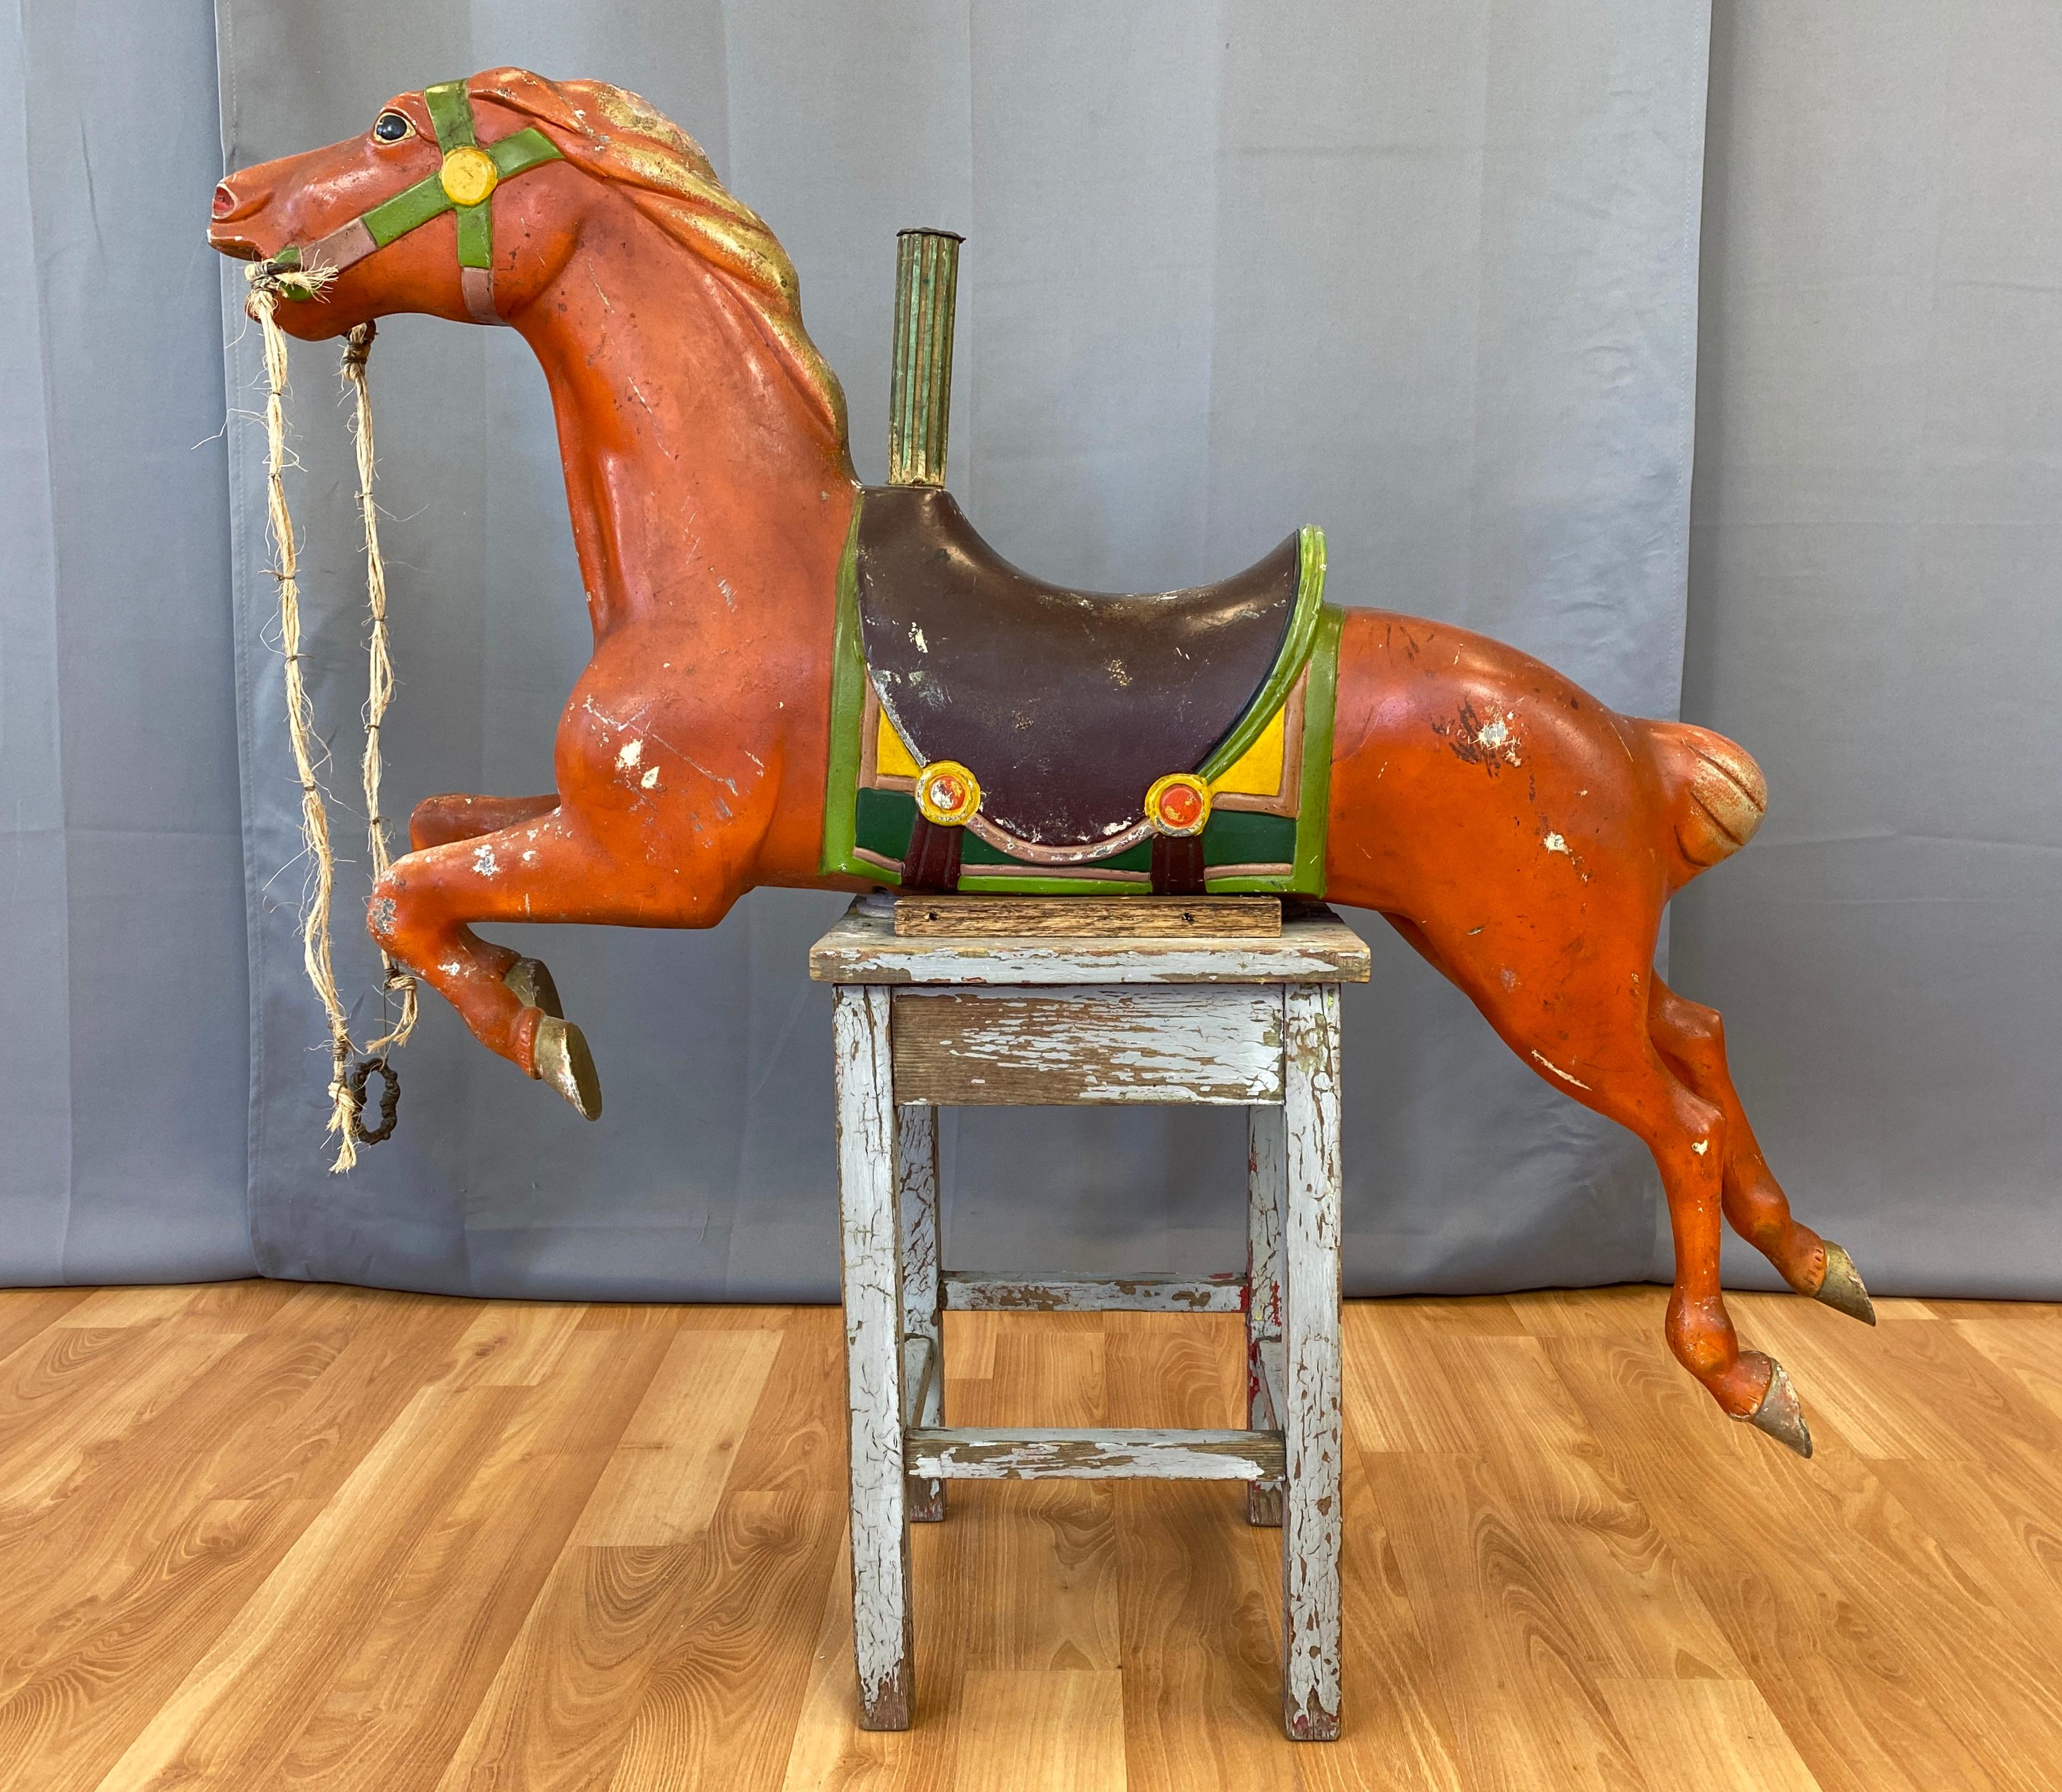 A wonderful whimsical circa 1940s painted metal carousel horse. 
Nicely made with it's main body colored in a burnt red, and a brown, green and yellow saddle.
Poise of the horse, is like it's jumping over a fence, has a newer custom halter, and